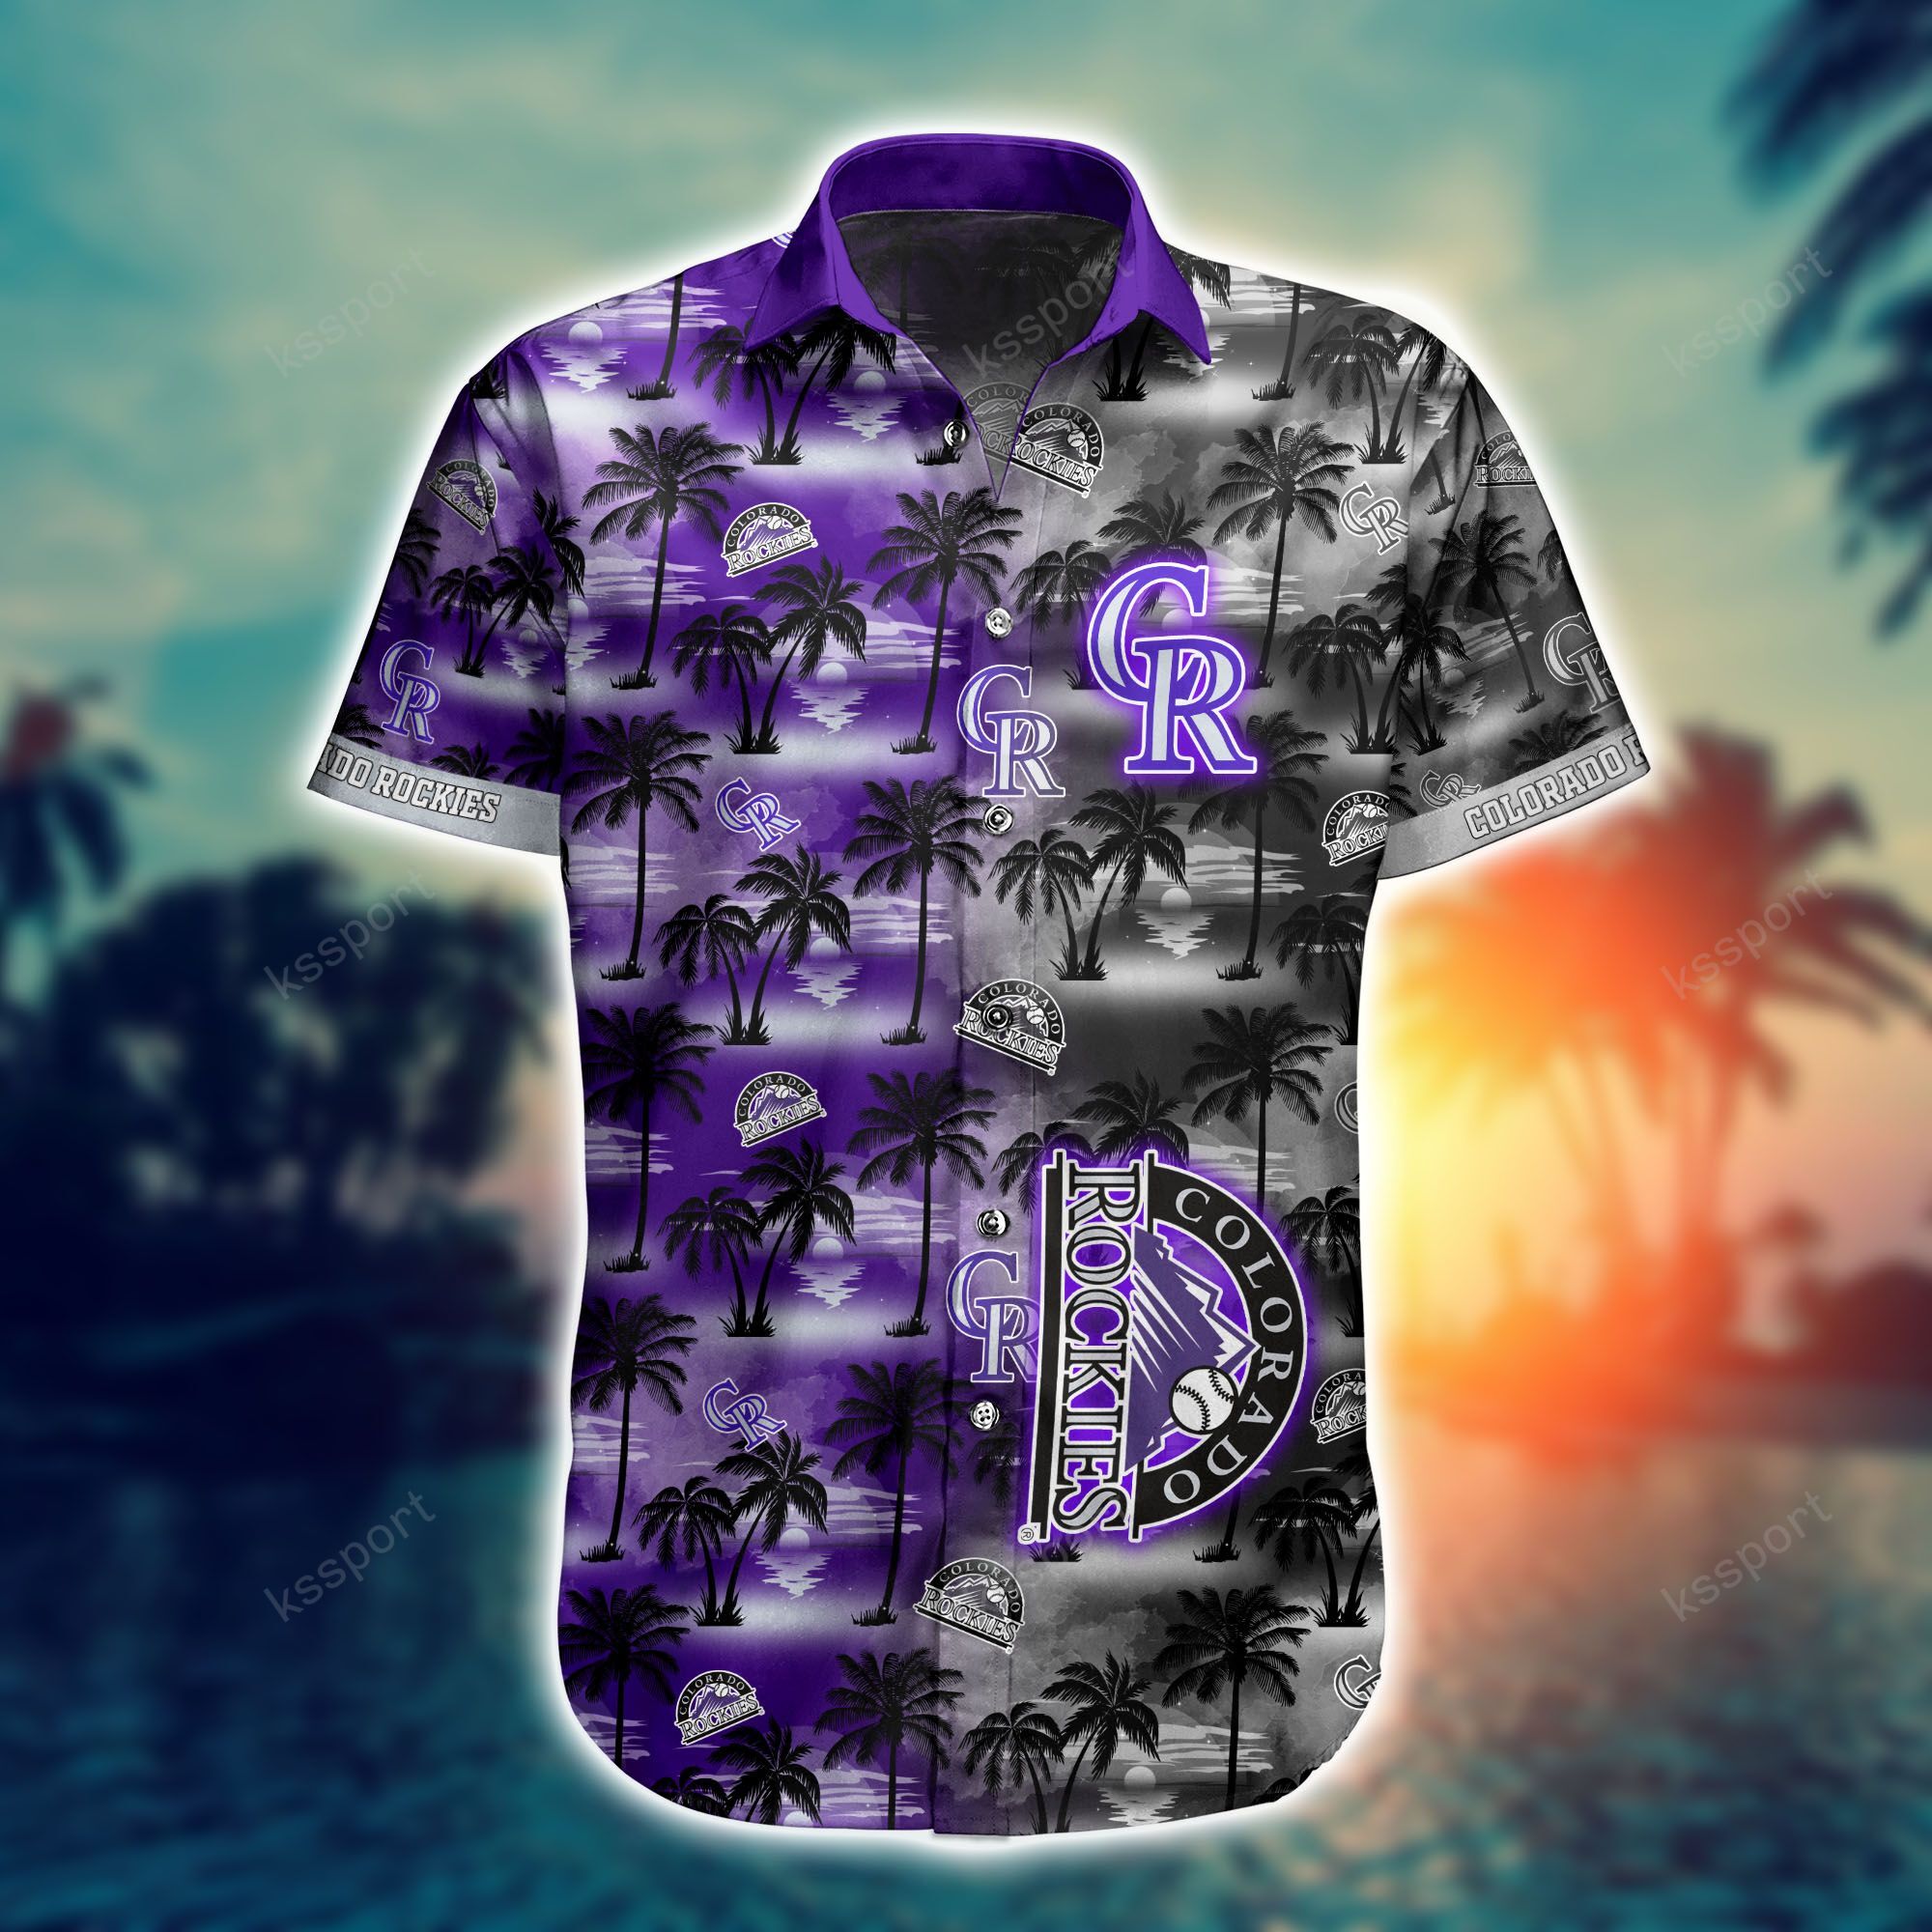 Top cool Hawaiian shirt 2022 - Make sure you get yours today before they run out! 222